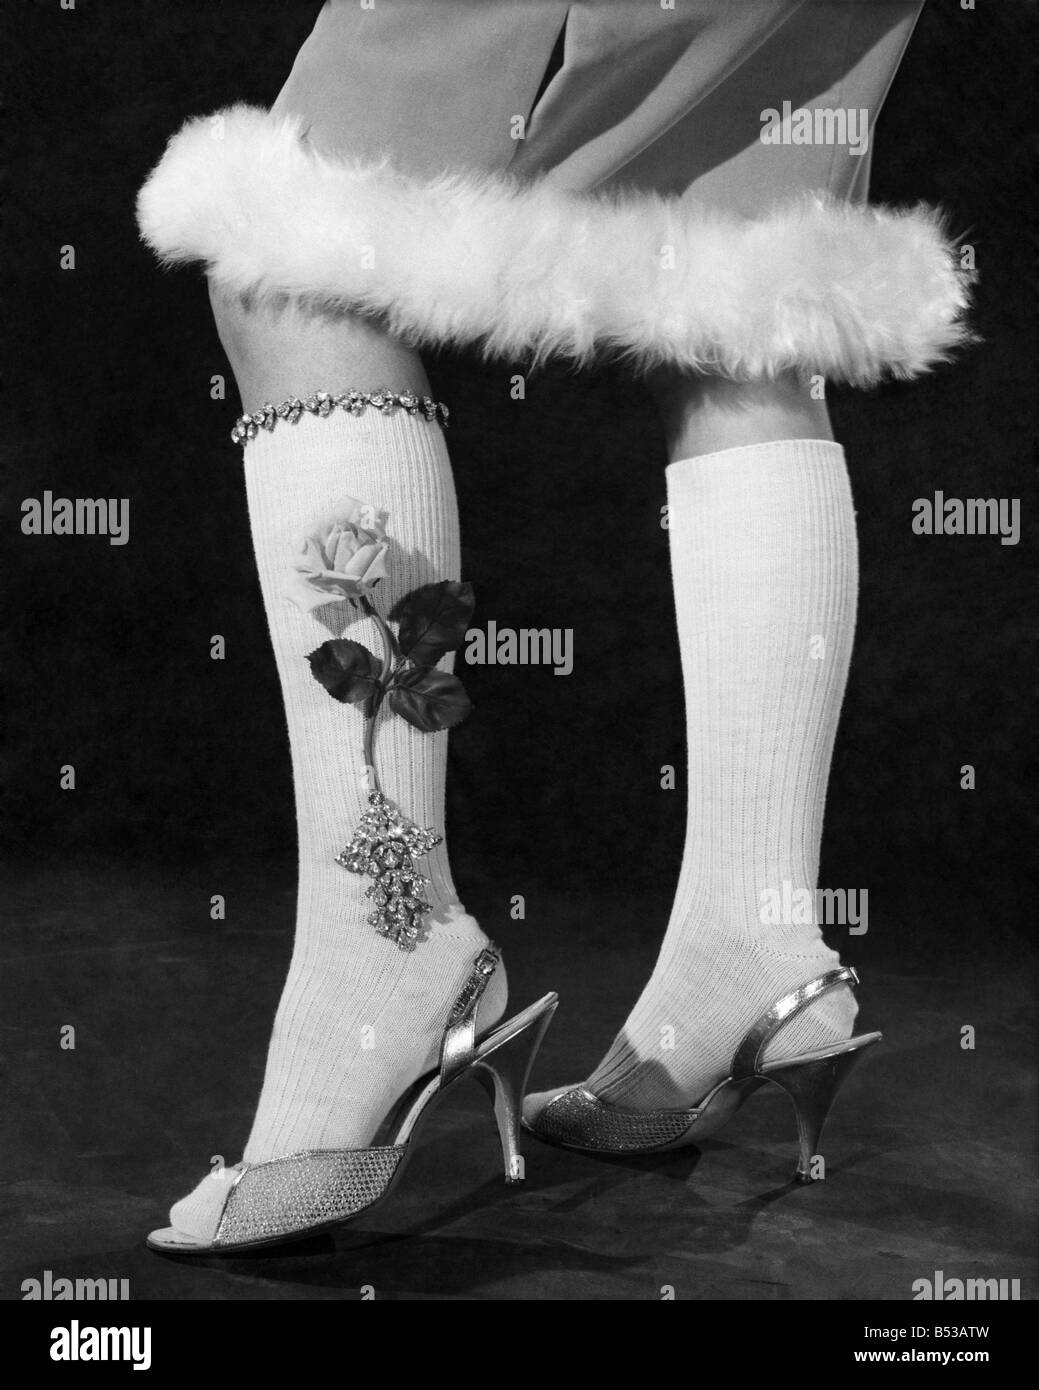 1960's fashion model heels Black and White Stock Photos & Images - Alamy